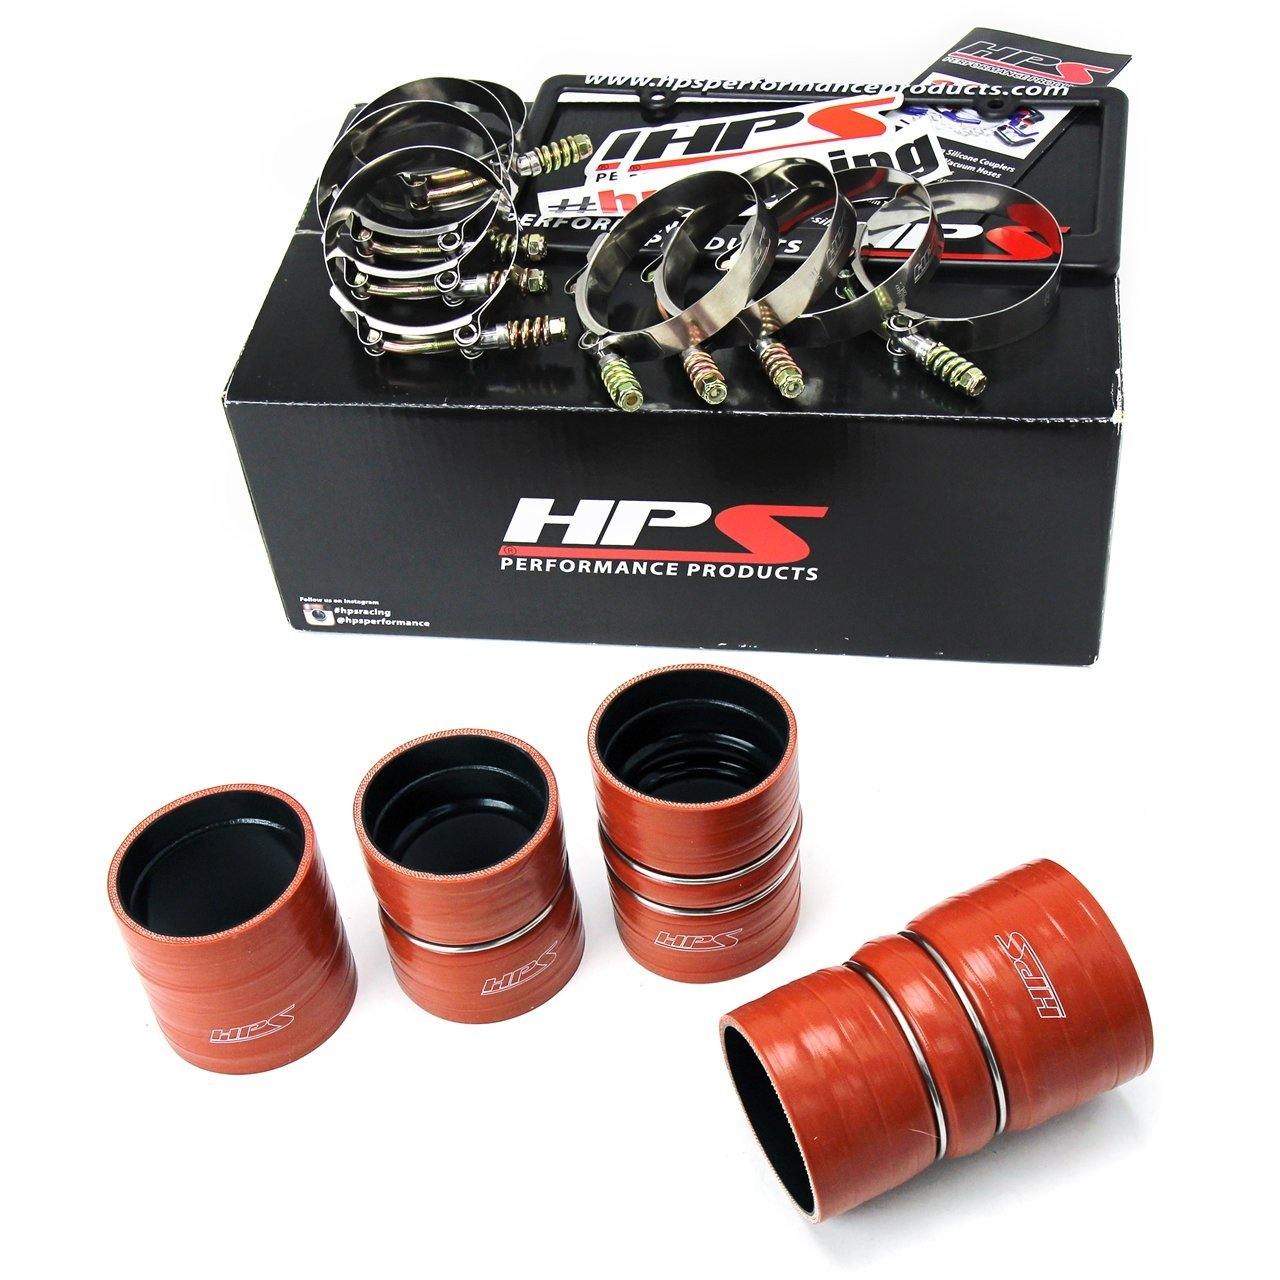 '08-10 Ford F250/350 Superduty Intercooler Boot Kit Performance Products HPS Performance parts